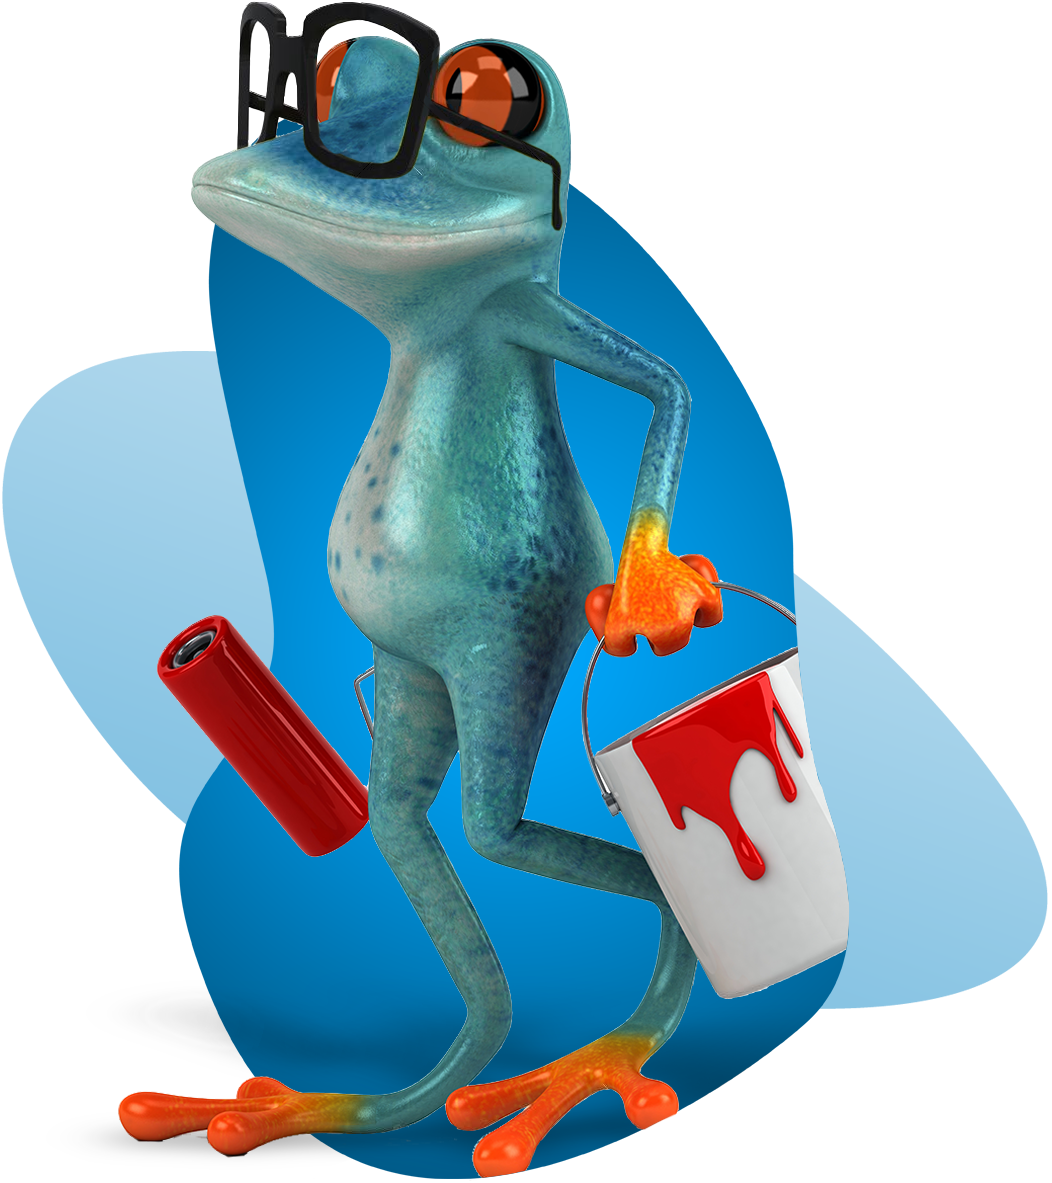 Cartoon frog holding a can of paint